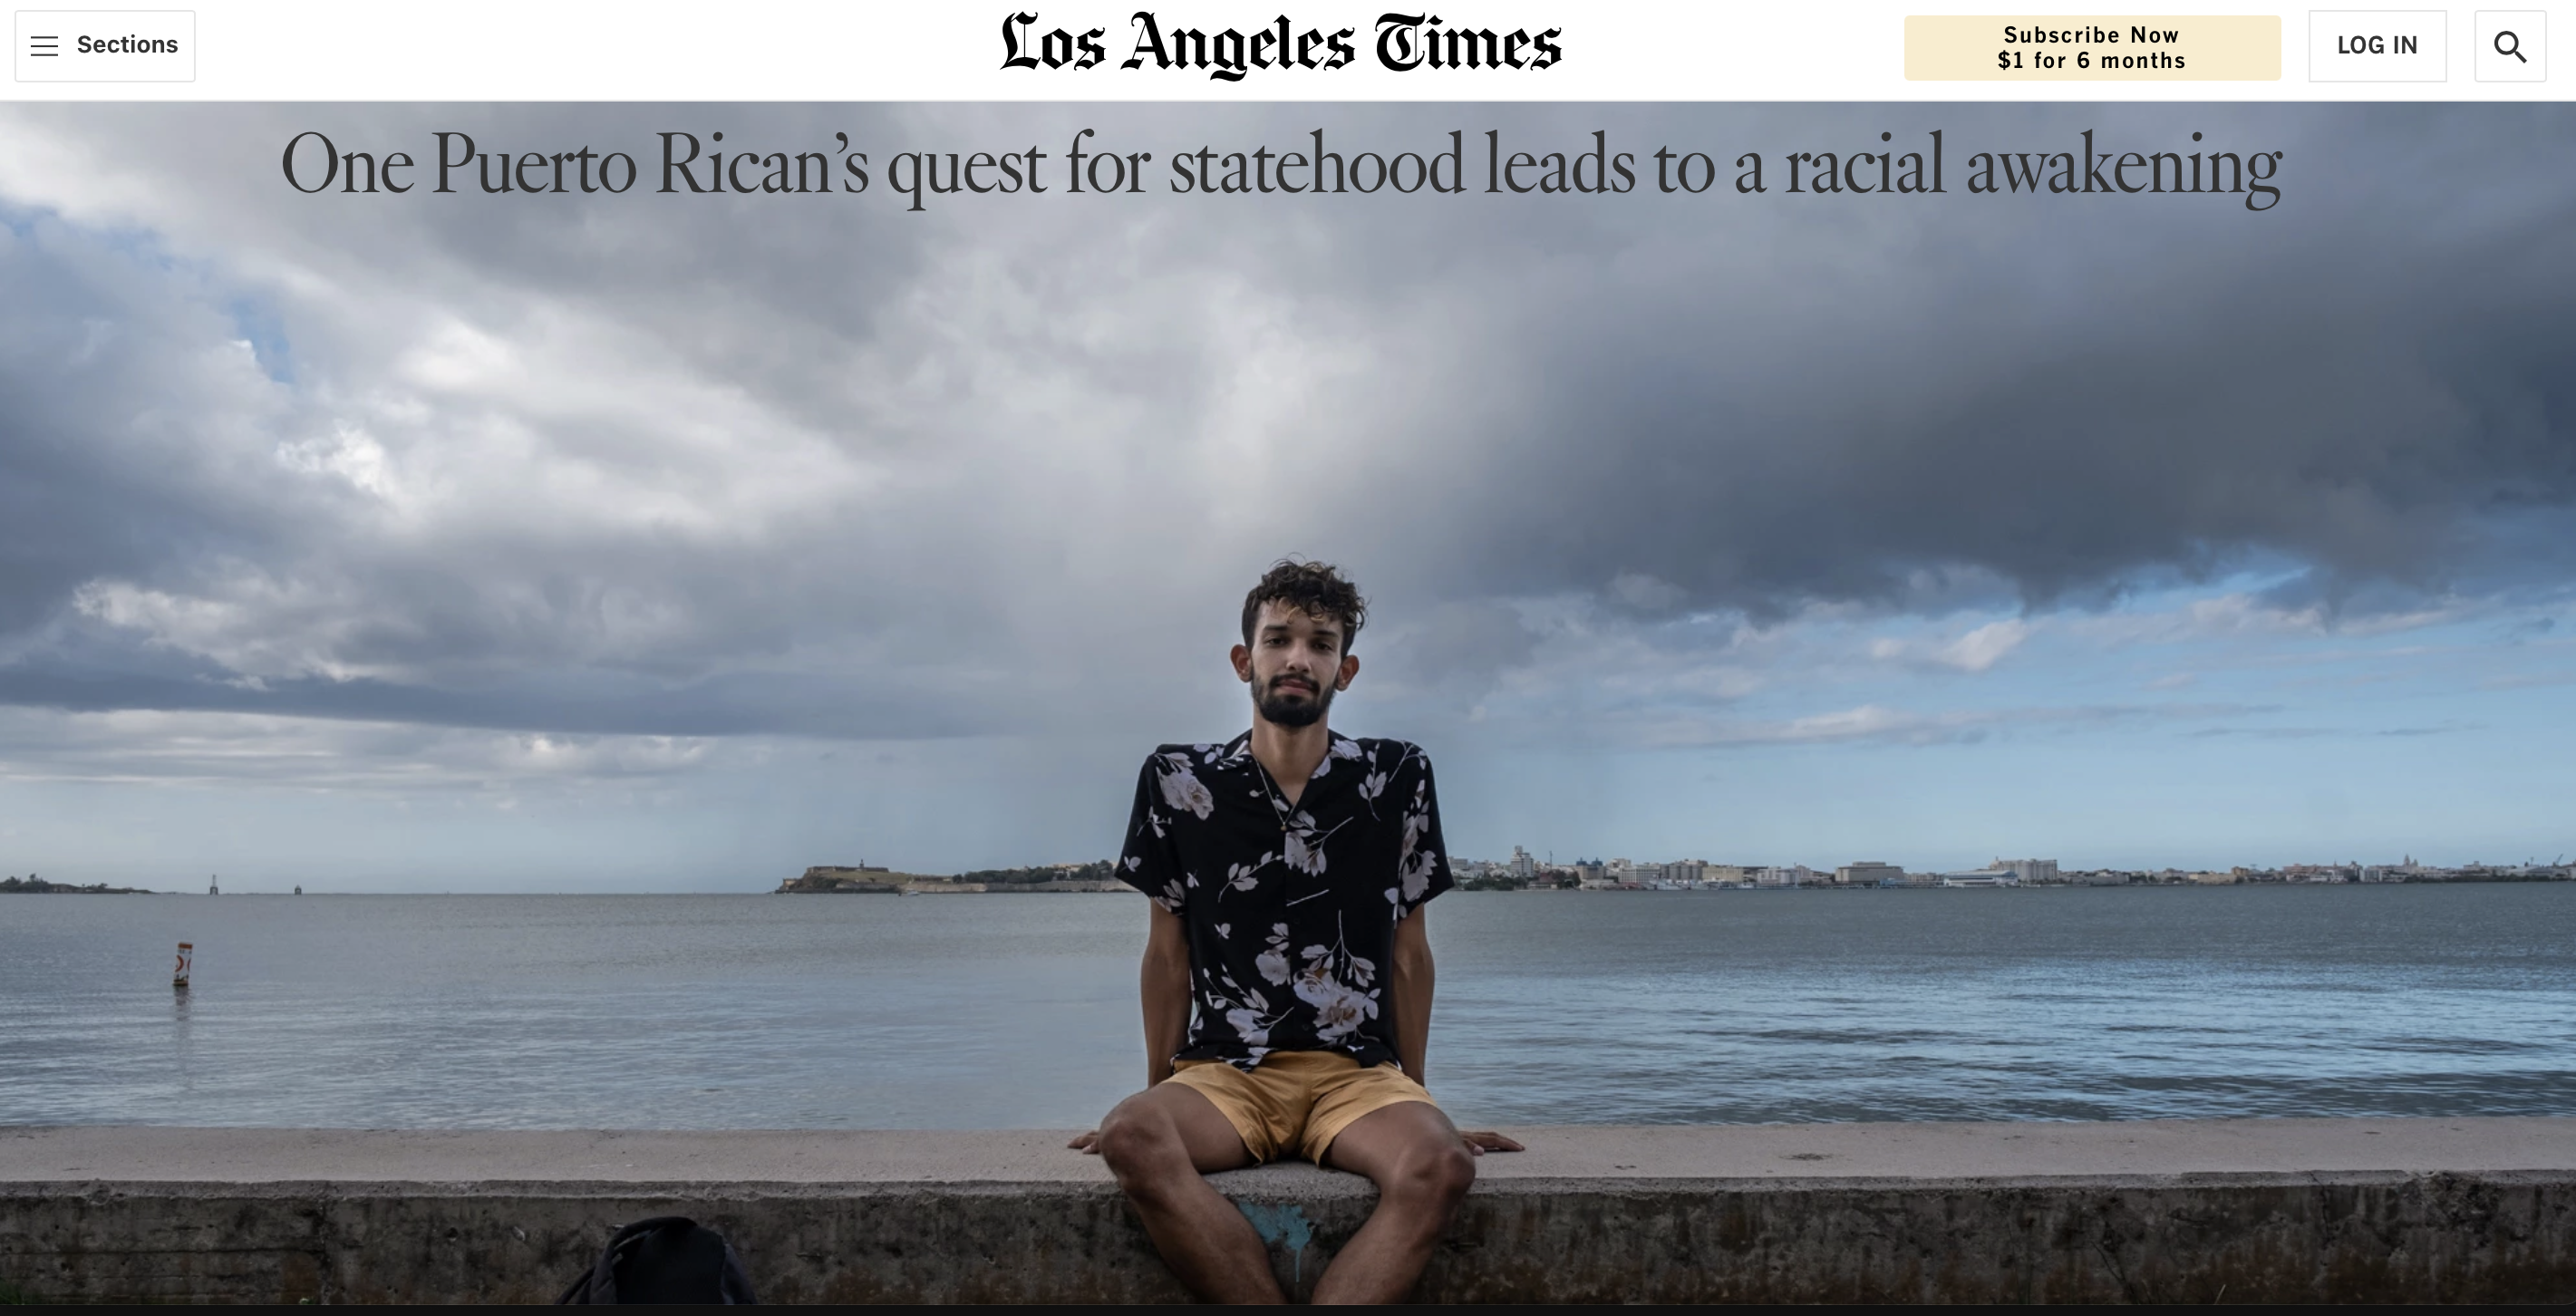 L.A. TIMES: One Puerto Rican’s quest for statehood leads to a racial awakening